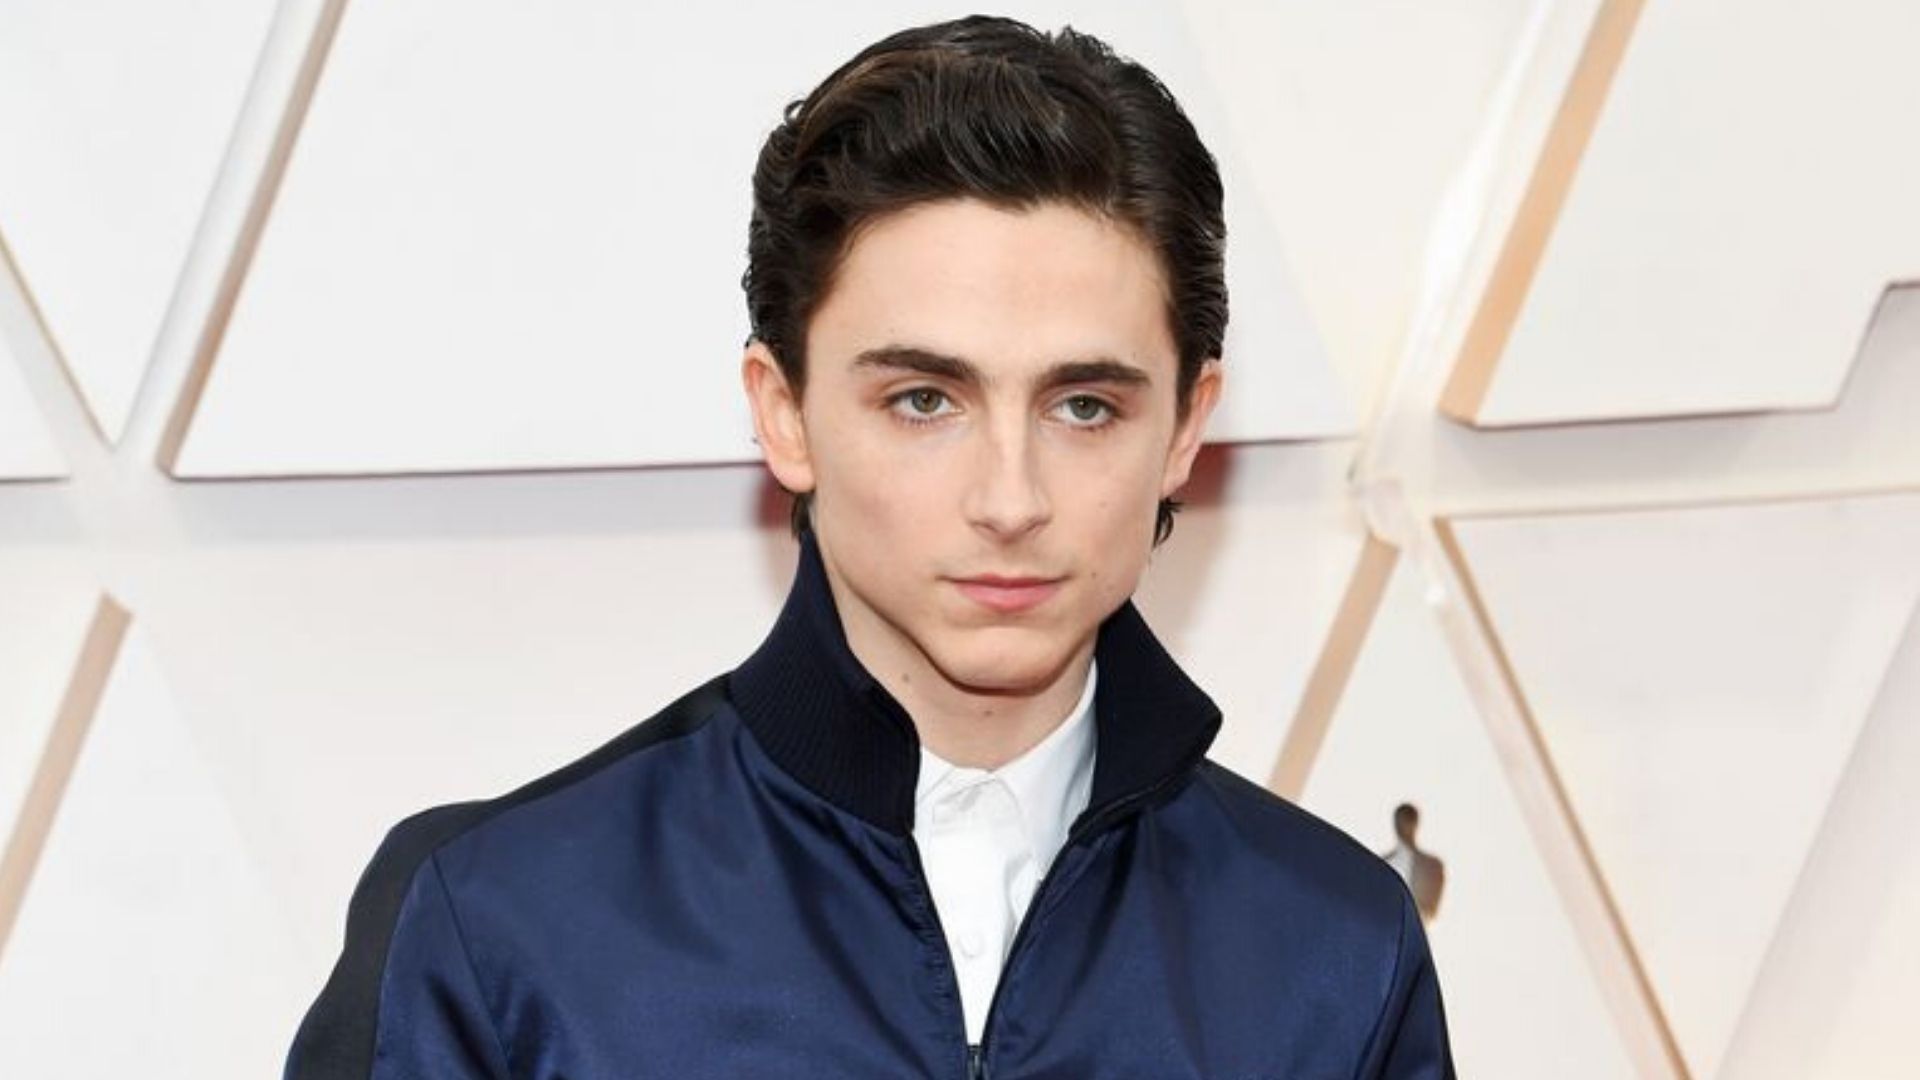 timothee-chalamet-at-the-2020-oscars.jpg